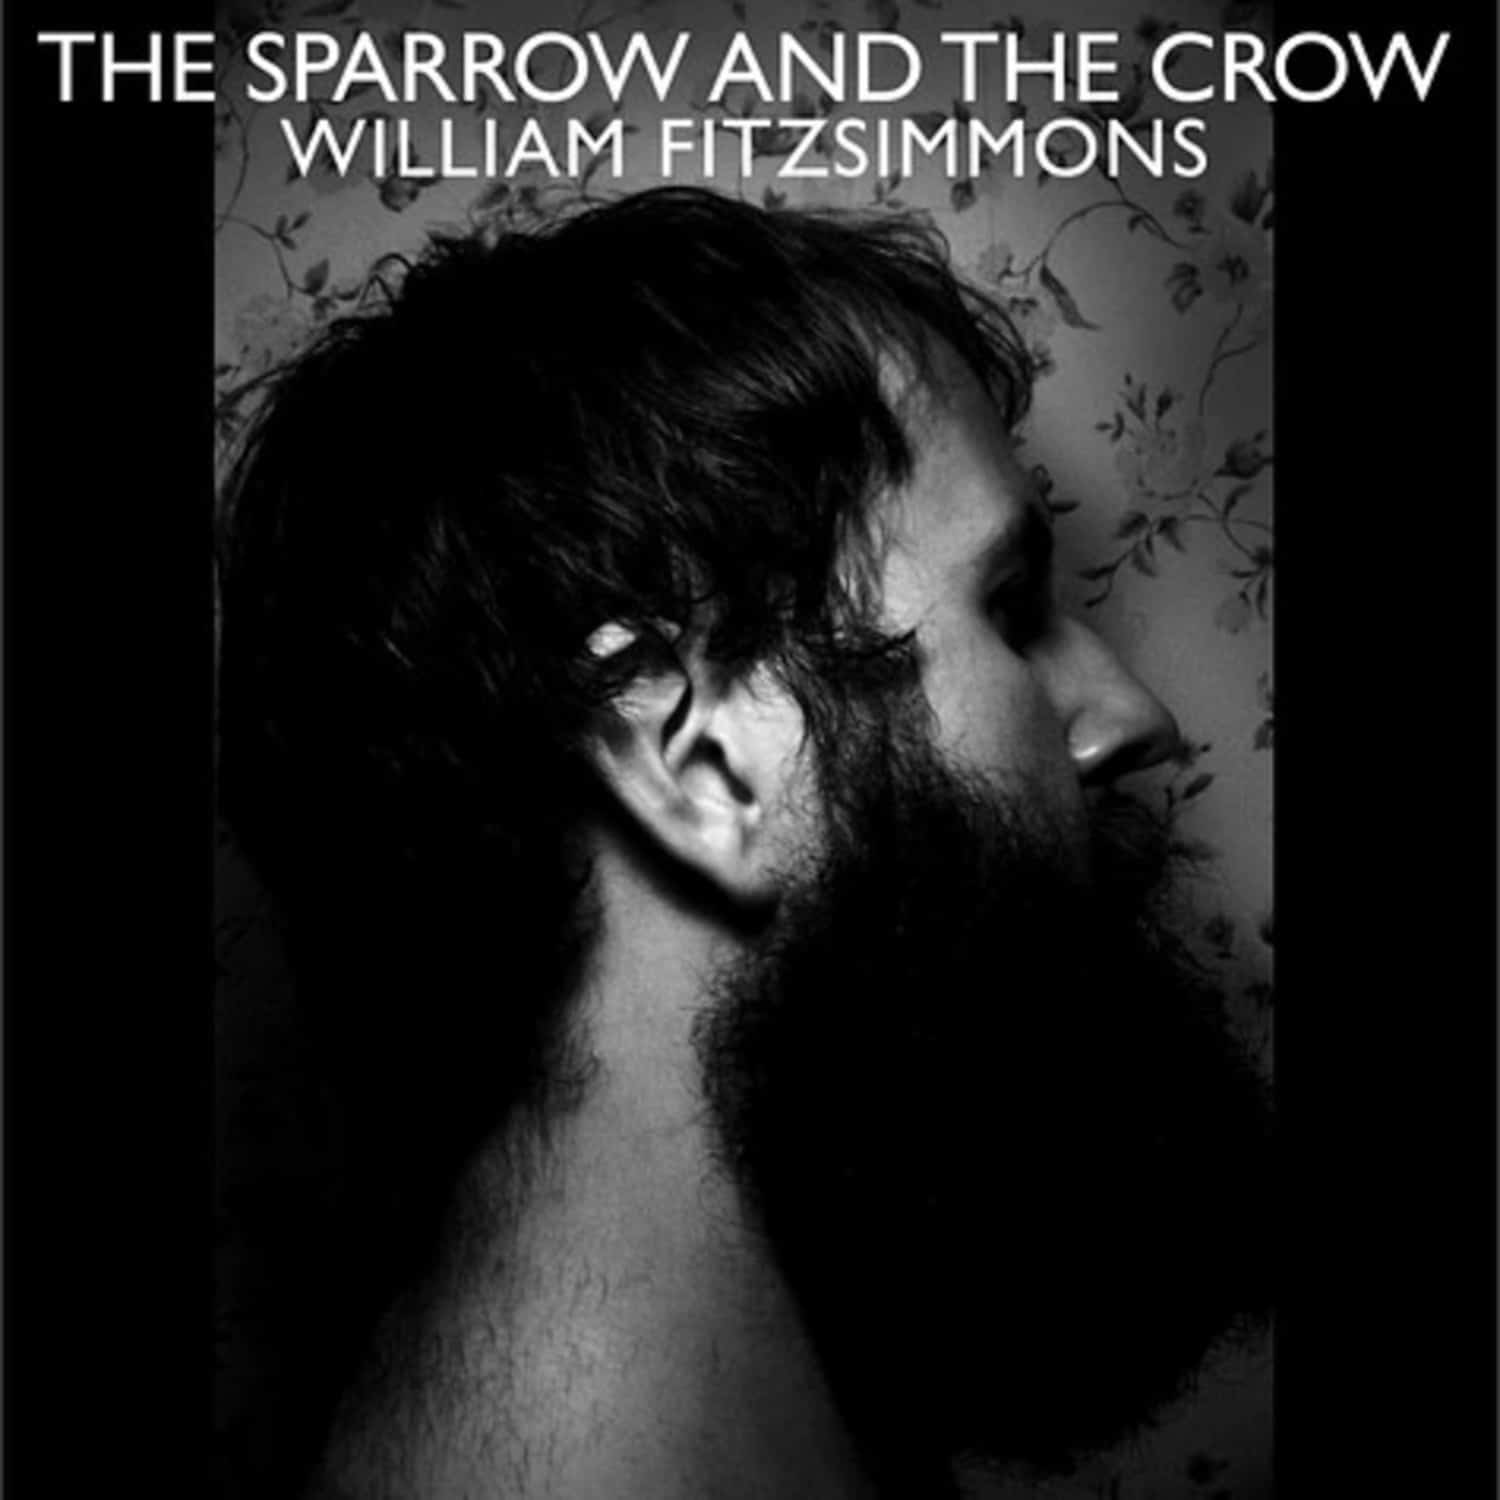 William Fitzsimmons - THE SPARROW AND THE CROW + DERIVATIVES 